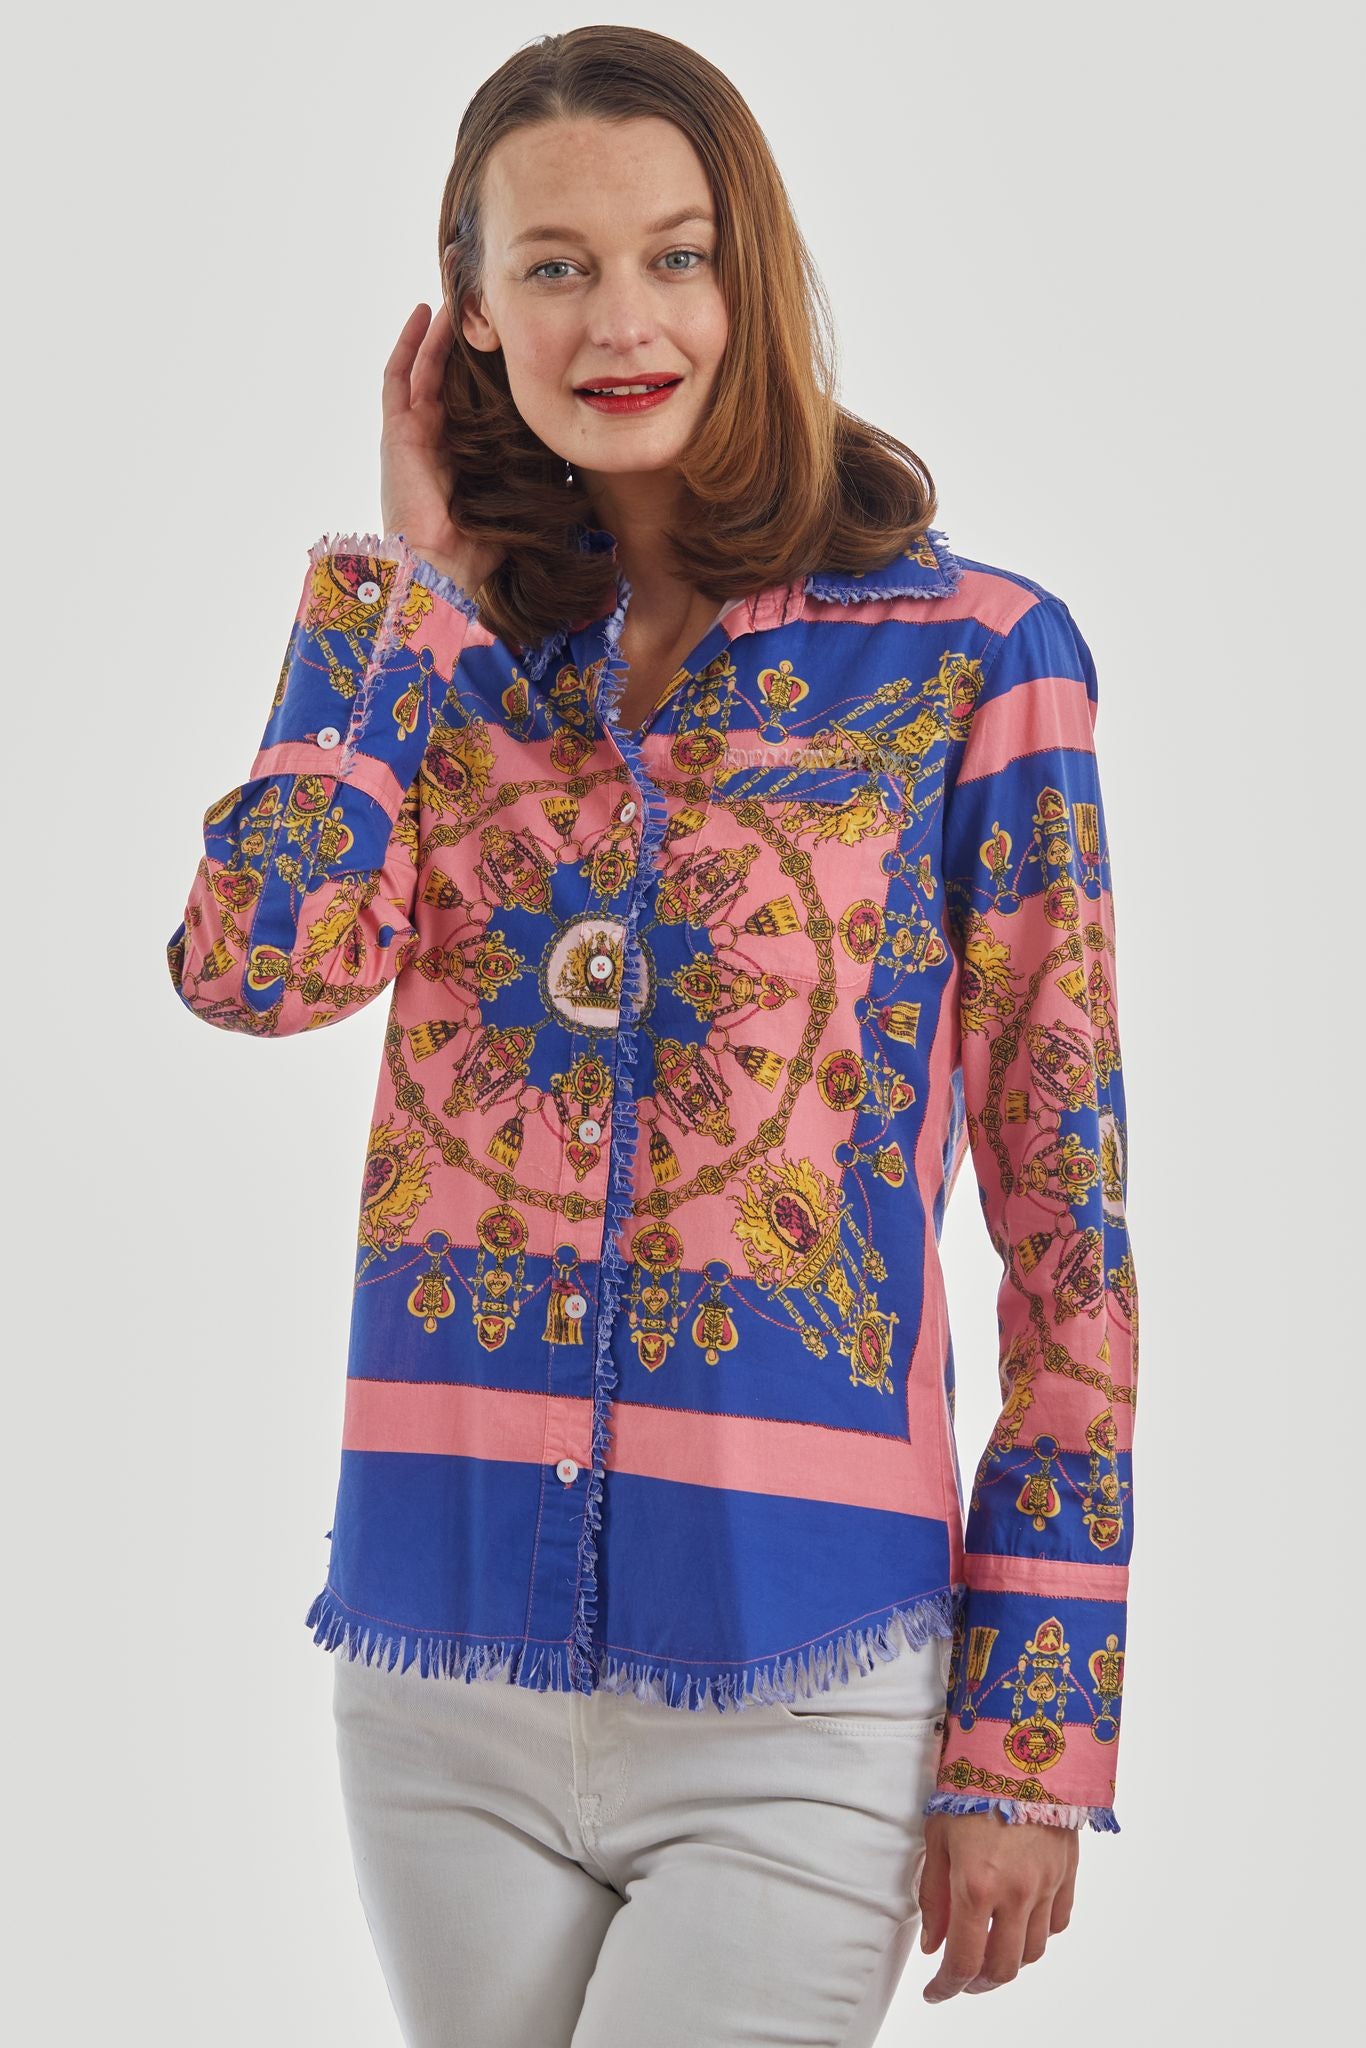 Cape Cod Tunic Navy Pink with Gold Engineered